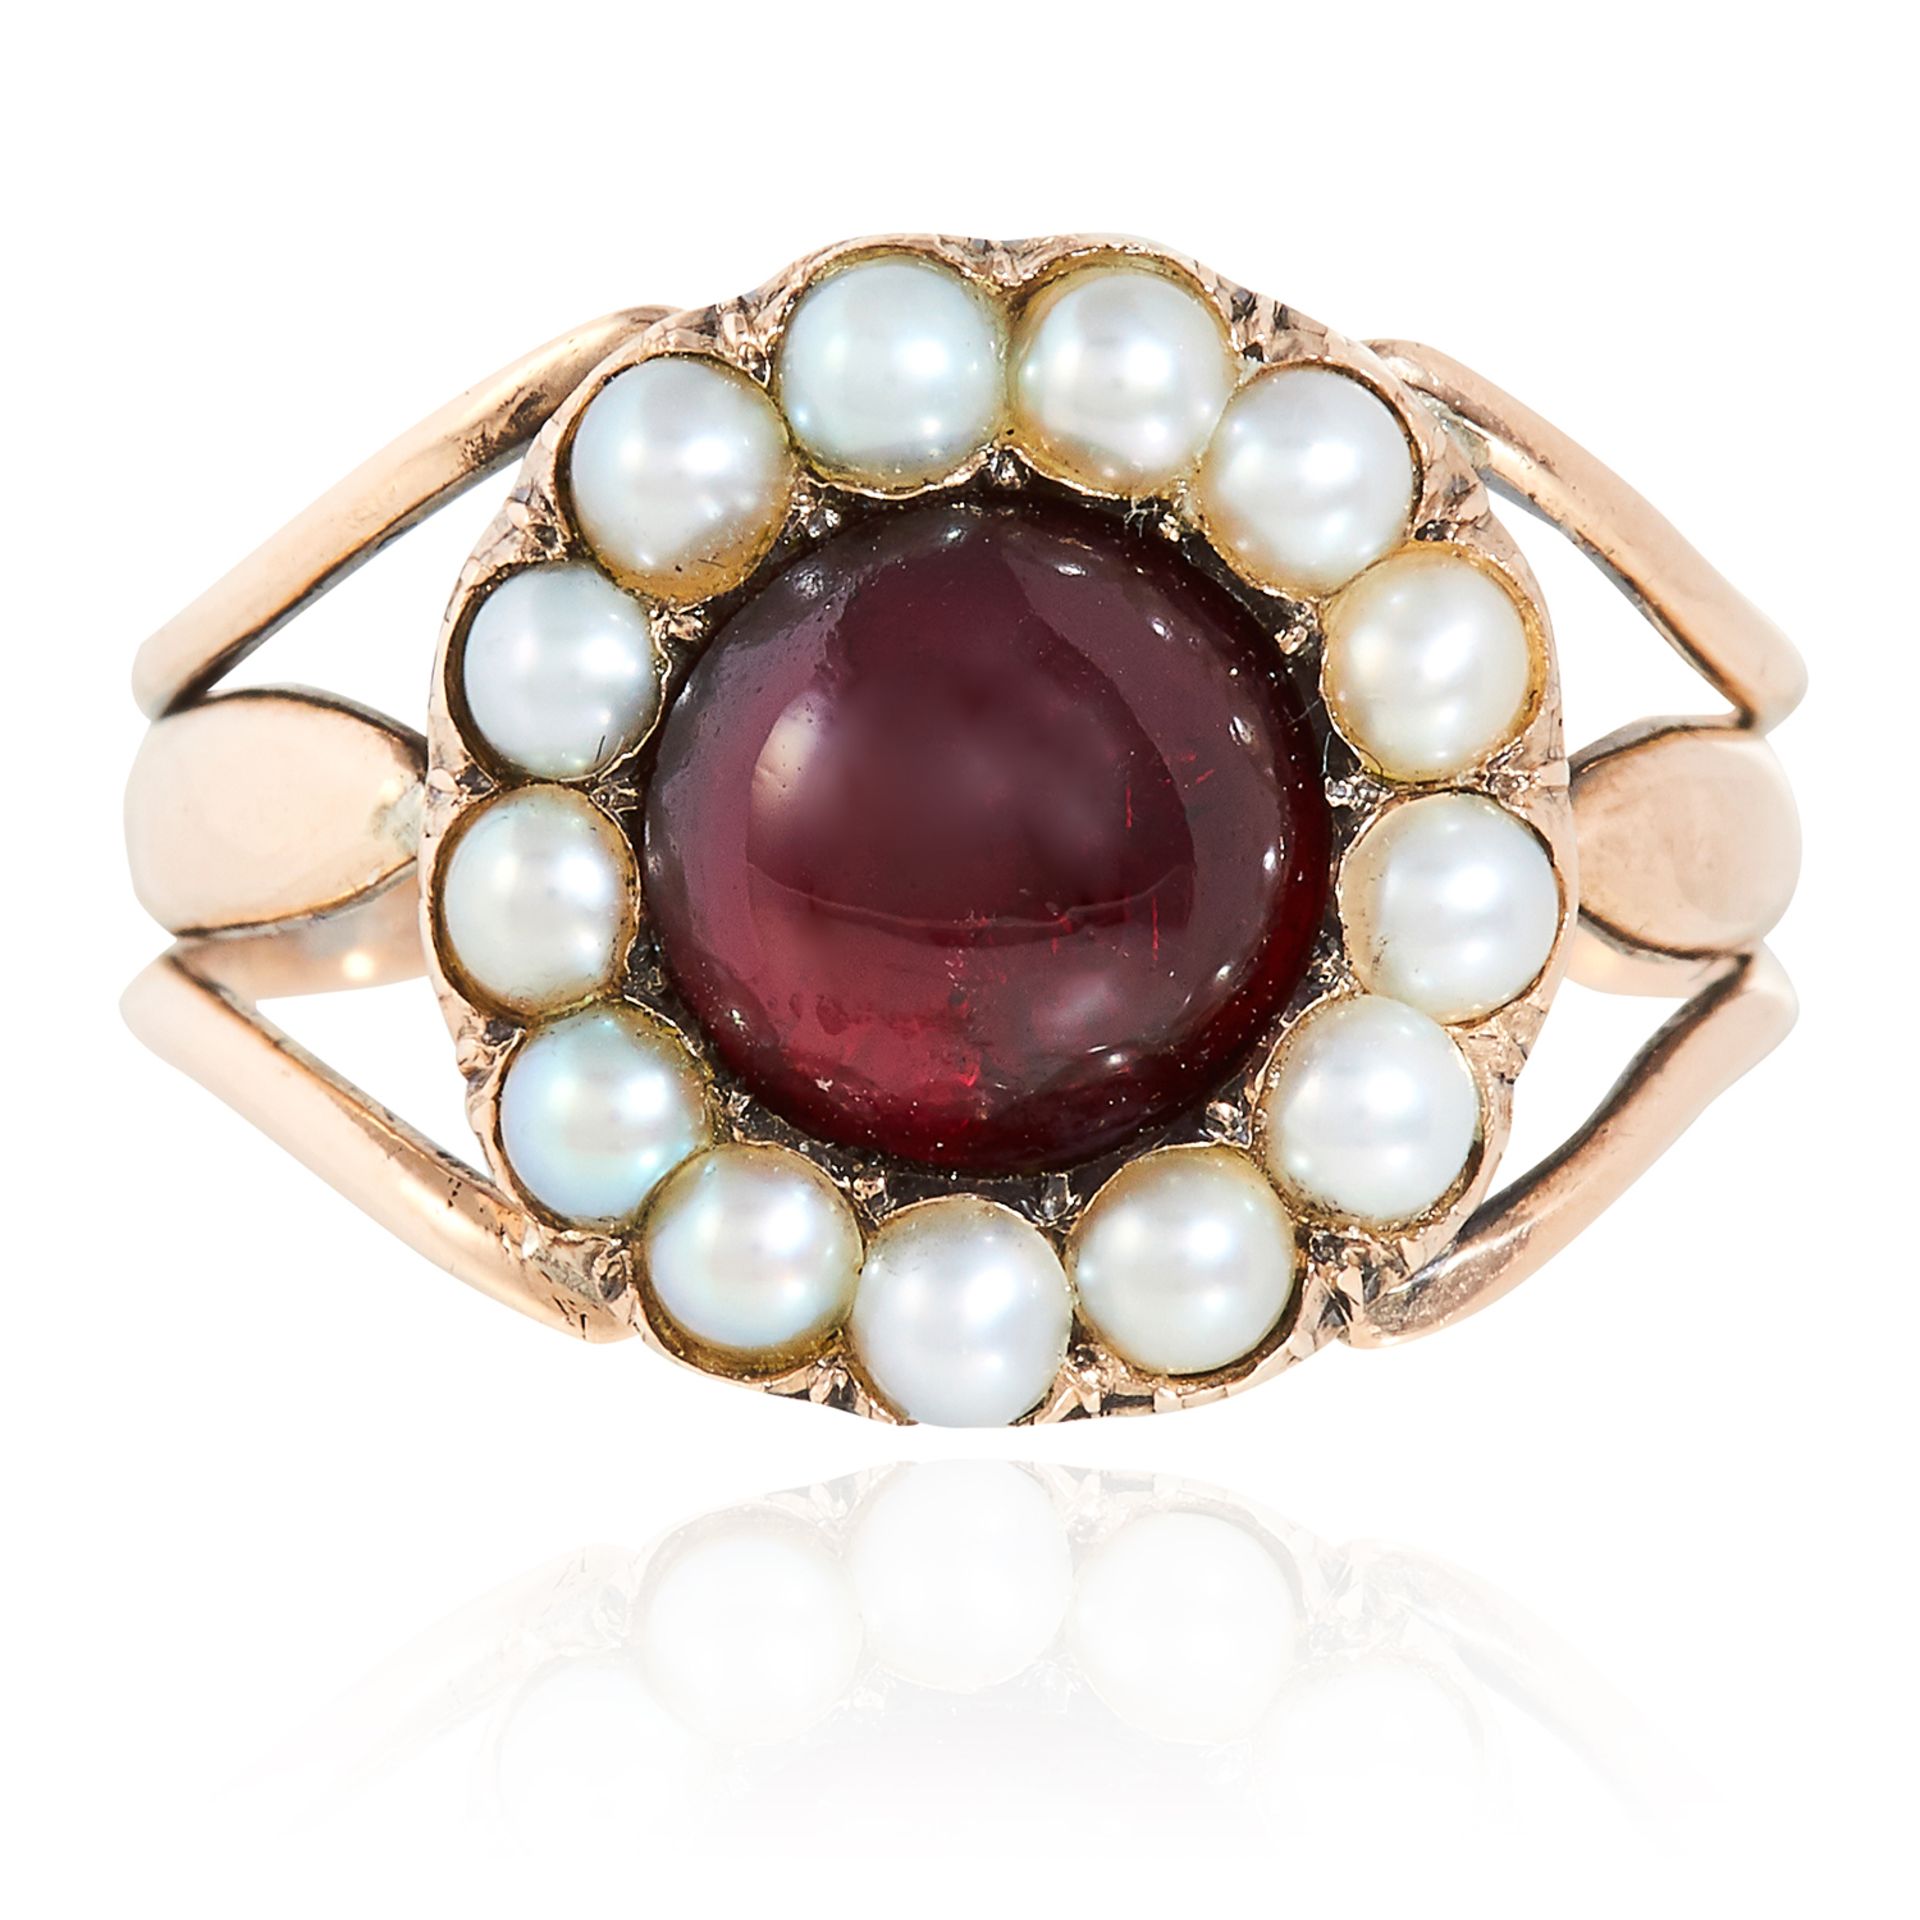 AN ANTIQUE GEORGIAN GARNET AND PEARL MOURNING RING, 1806 in high carat yellow gold, the round